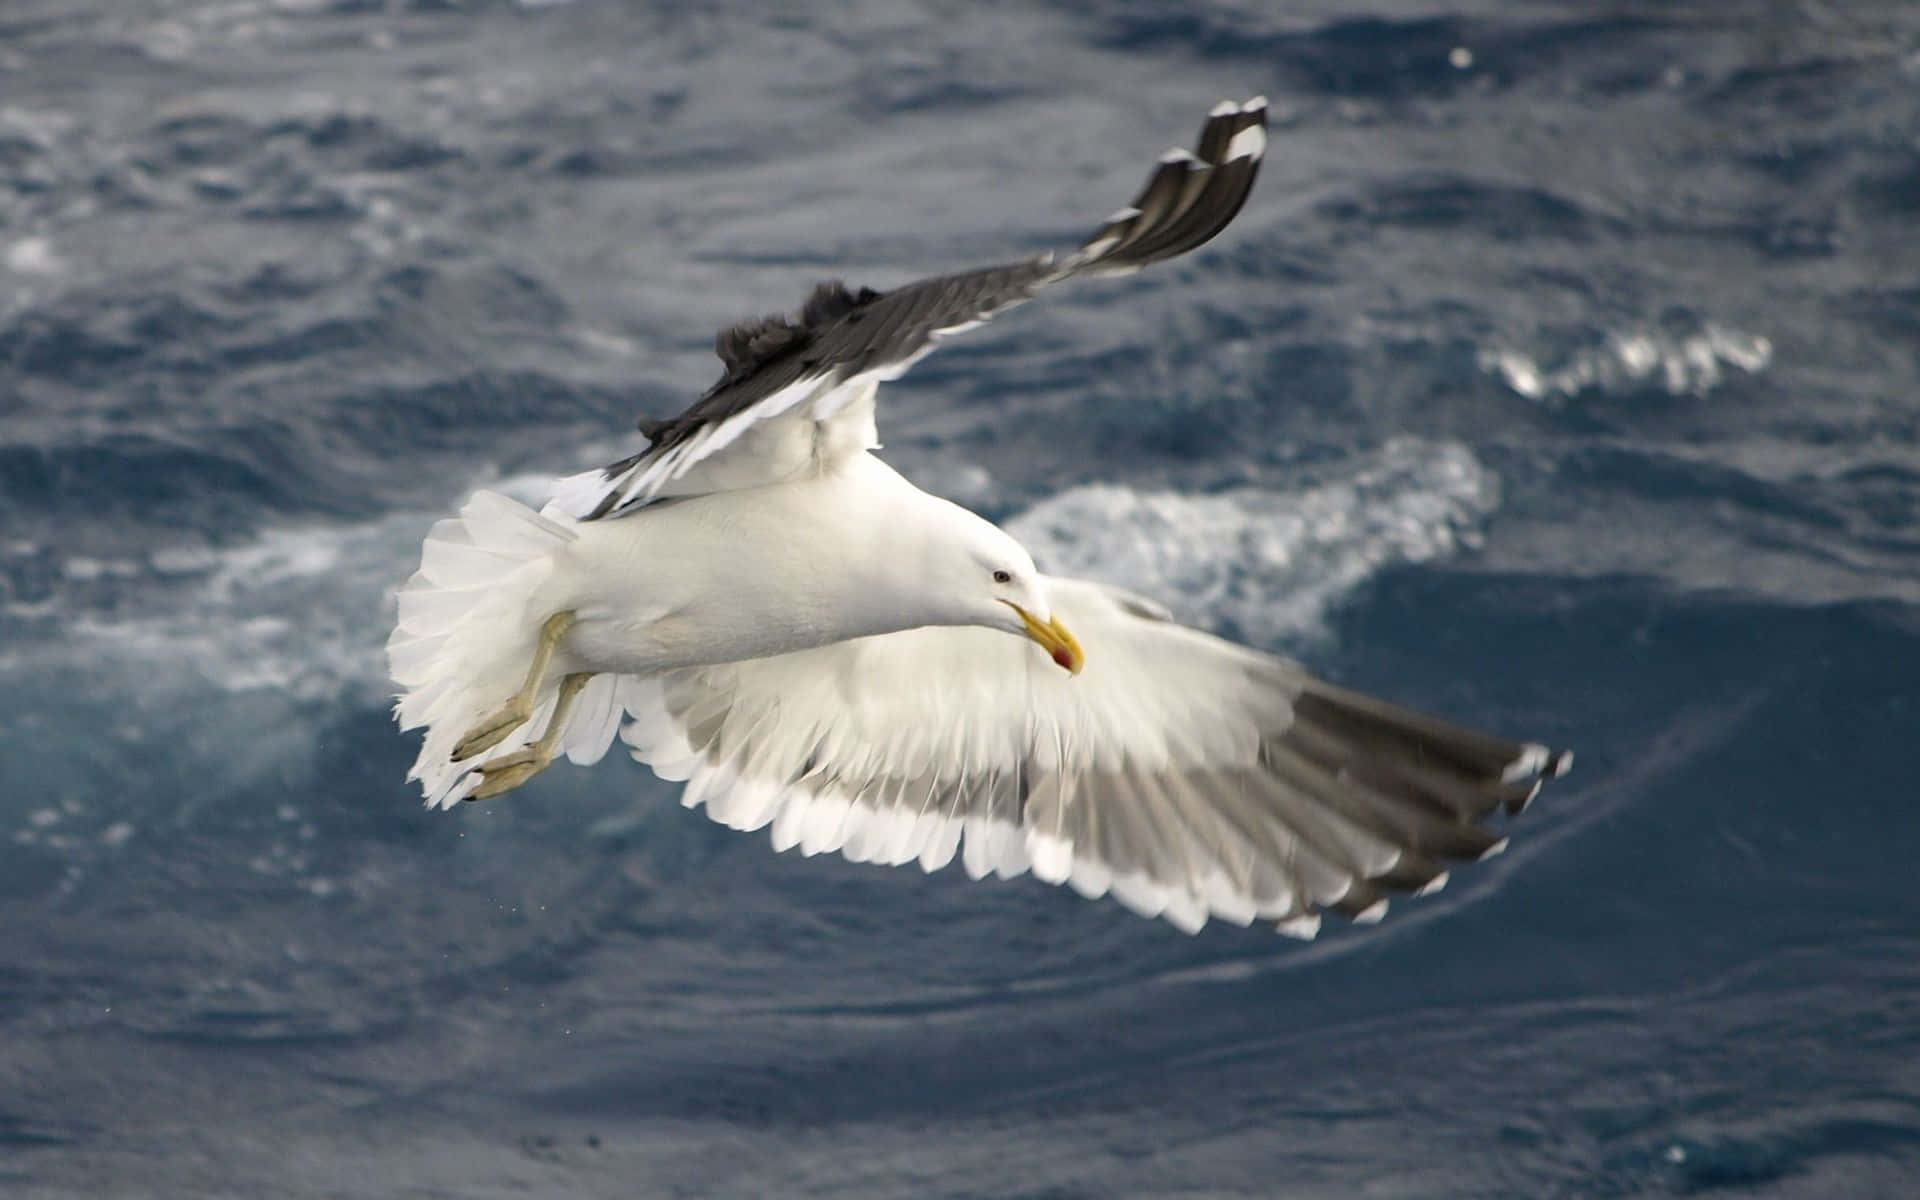 Majestic Seagull soaring over the ocean Wallpaper